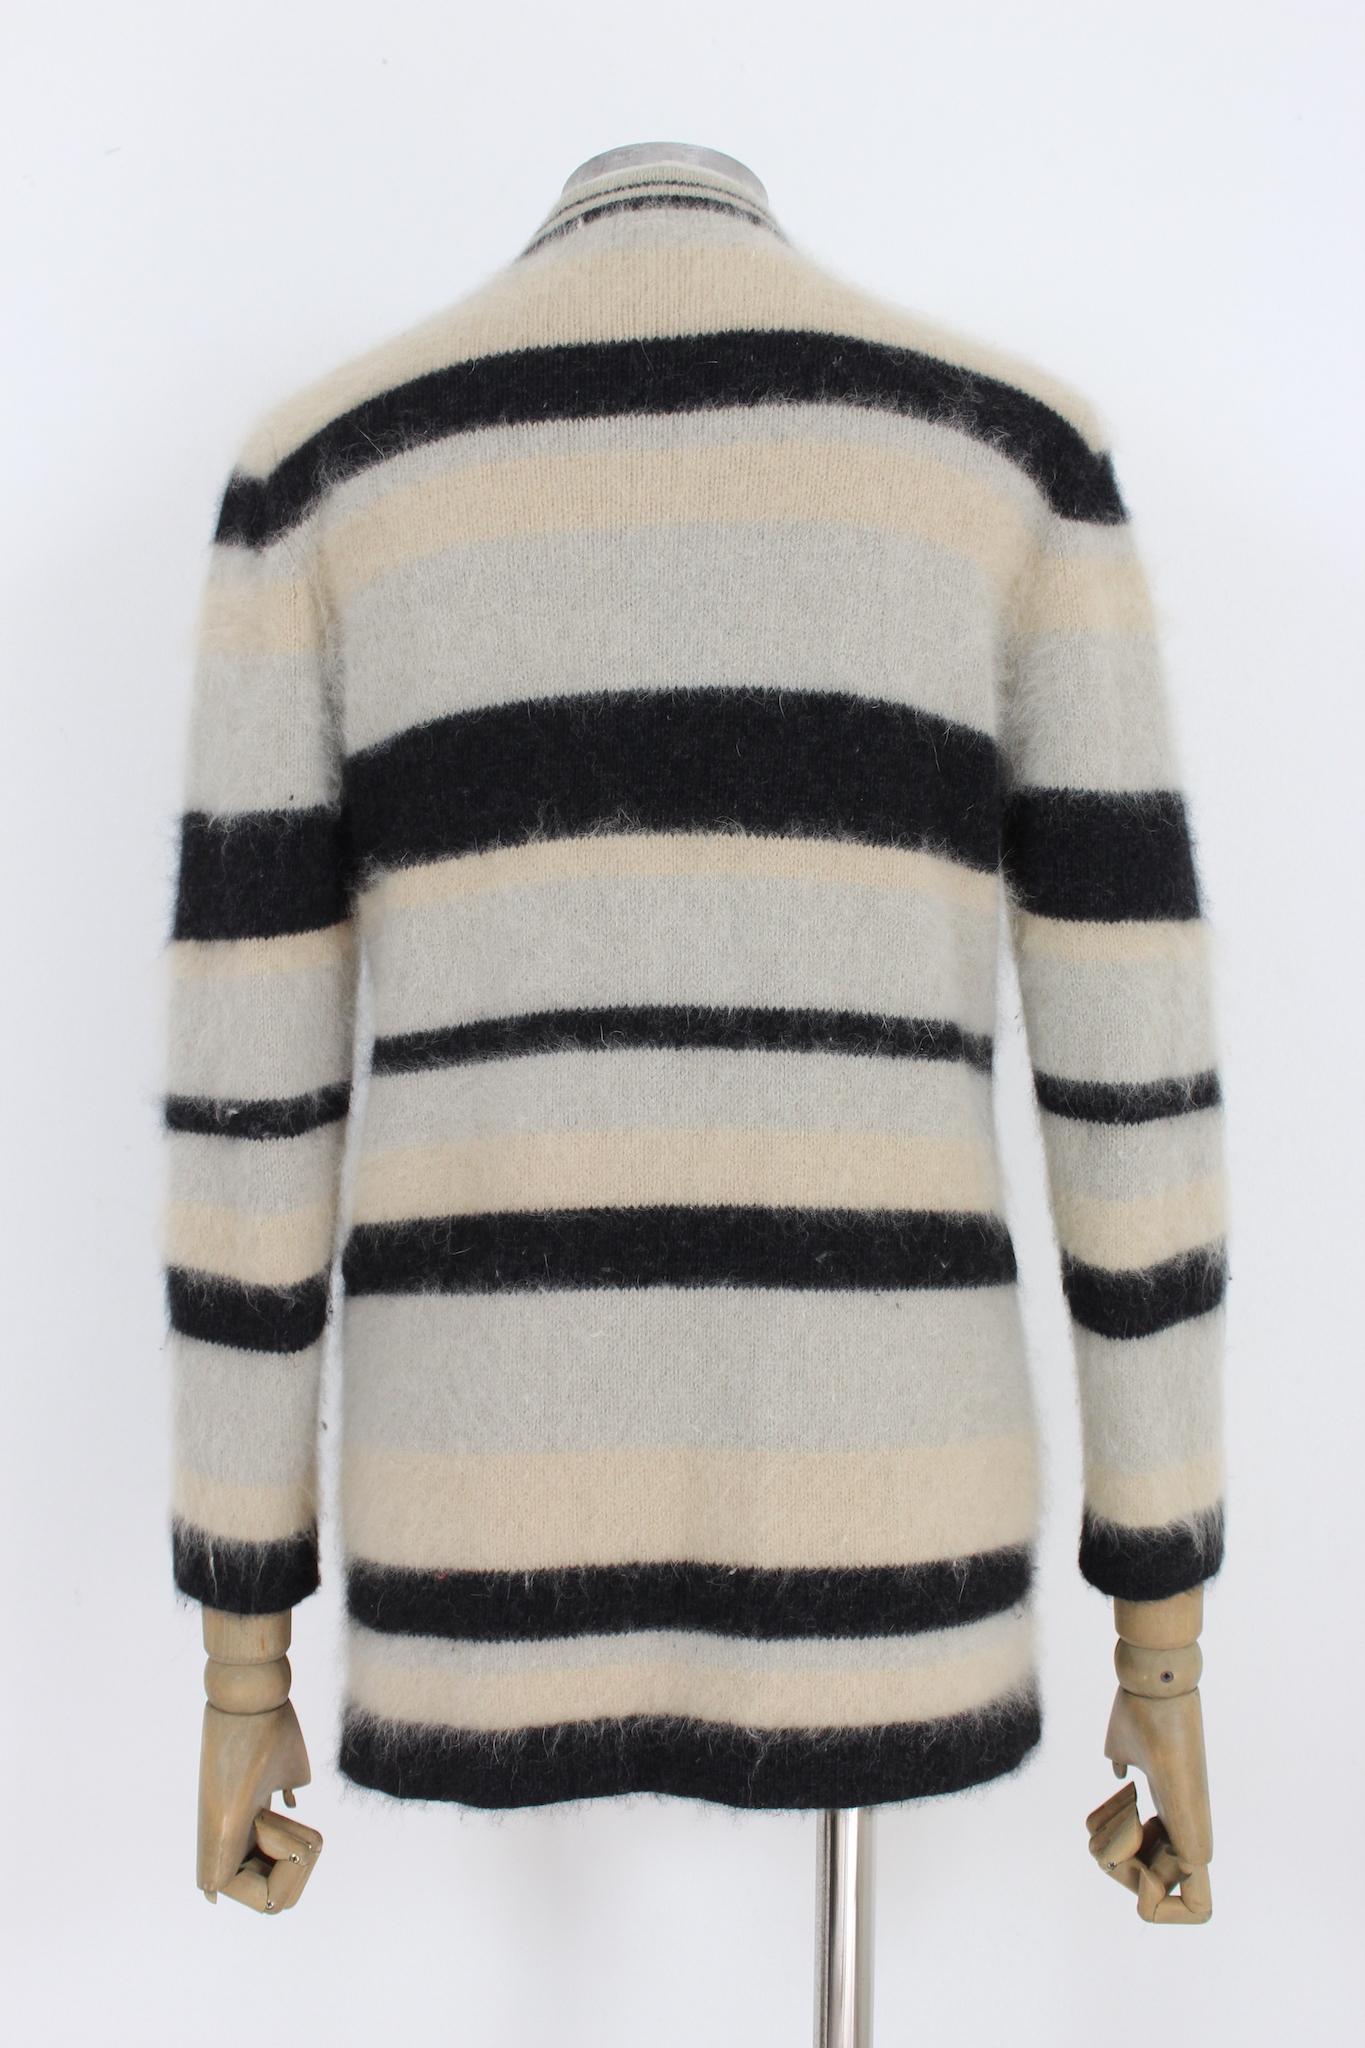 Valentino vintage 90s soft wool sweater jacket. Beige and black striped cardigan, on the hips there are loops to be able to put on a belt. Angora and wool fabric. Made in Italy.

Size: 42 It 8 Us 10 Uk

Shoulder: 48 cm
Bust / Chest: 52 cm
Length: 75